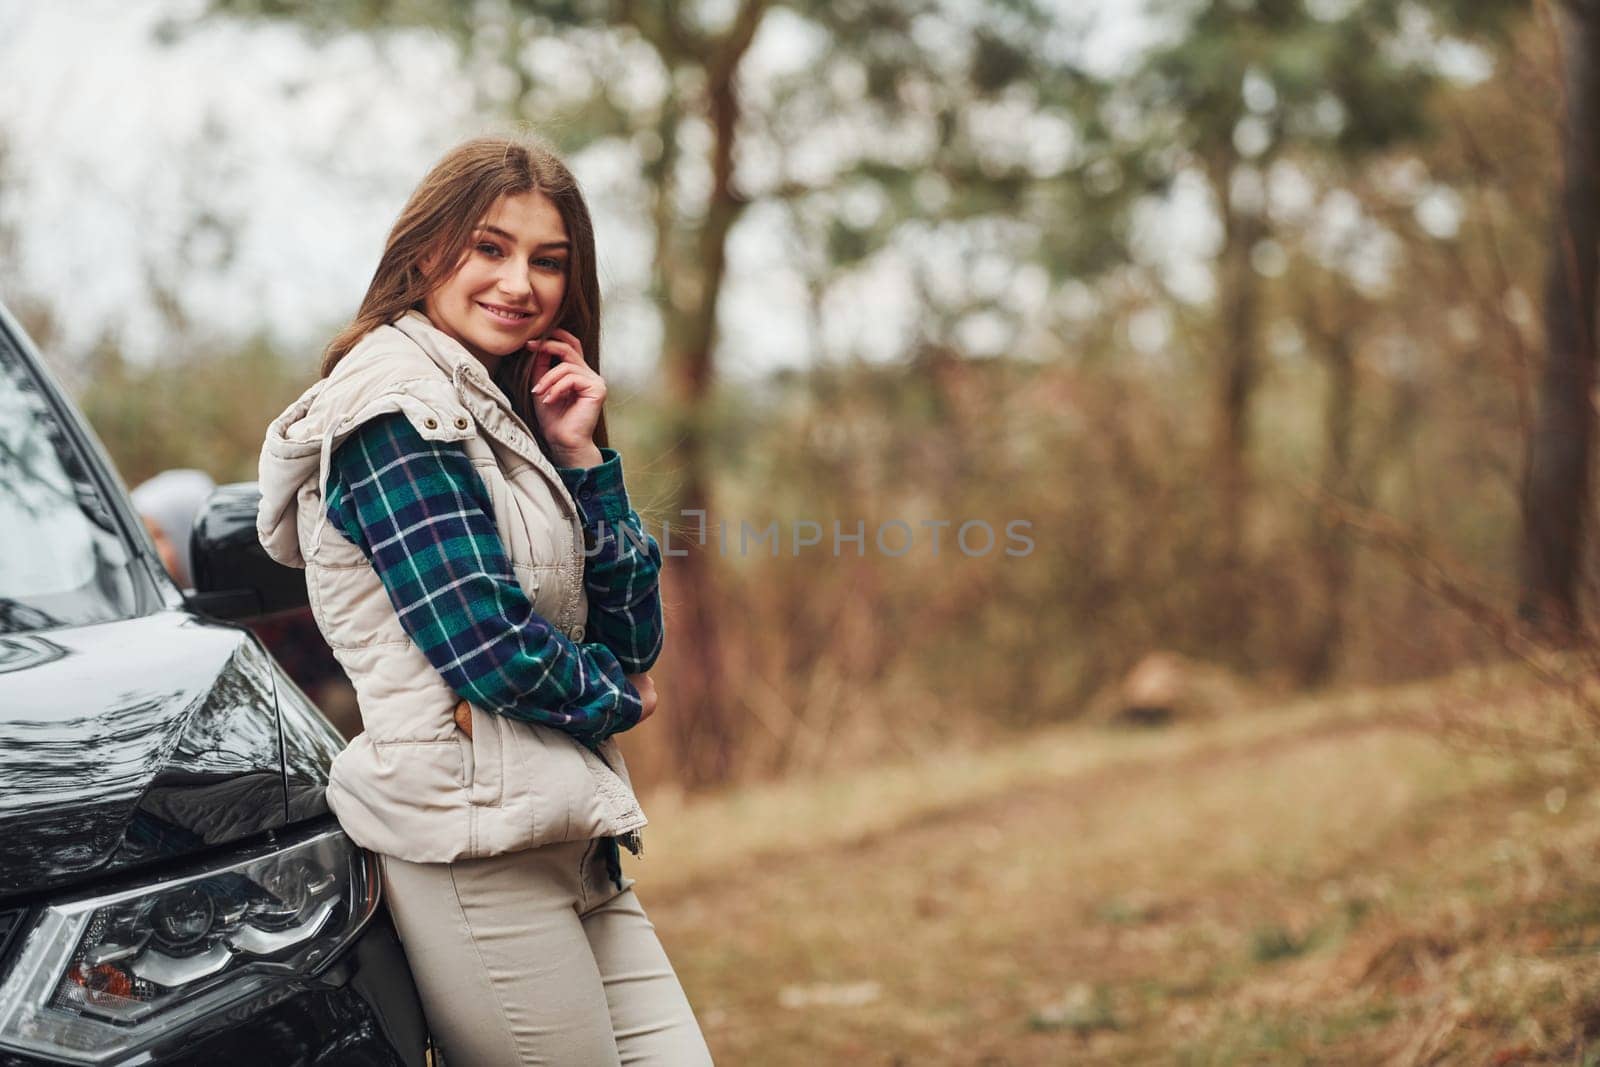 Young cheerful girl standing near modern black car outdoors in the forest.